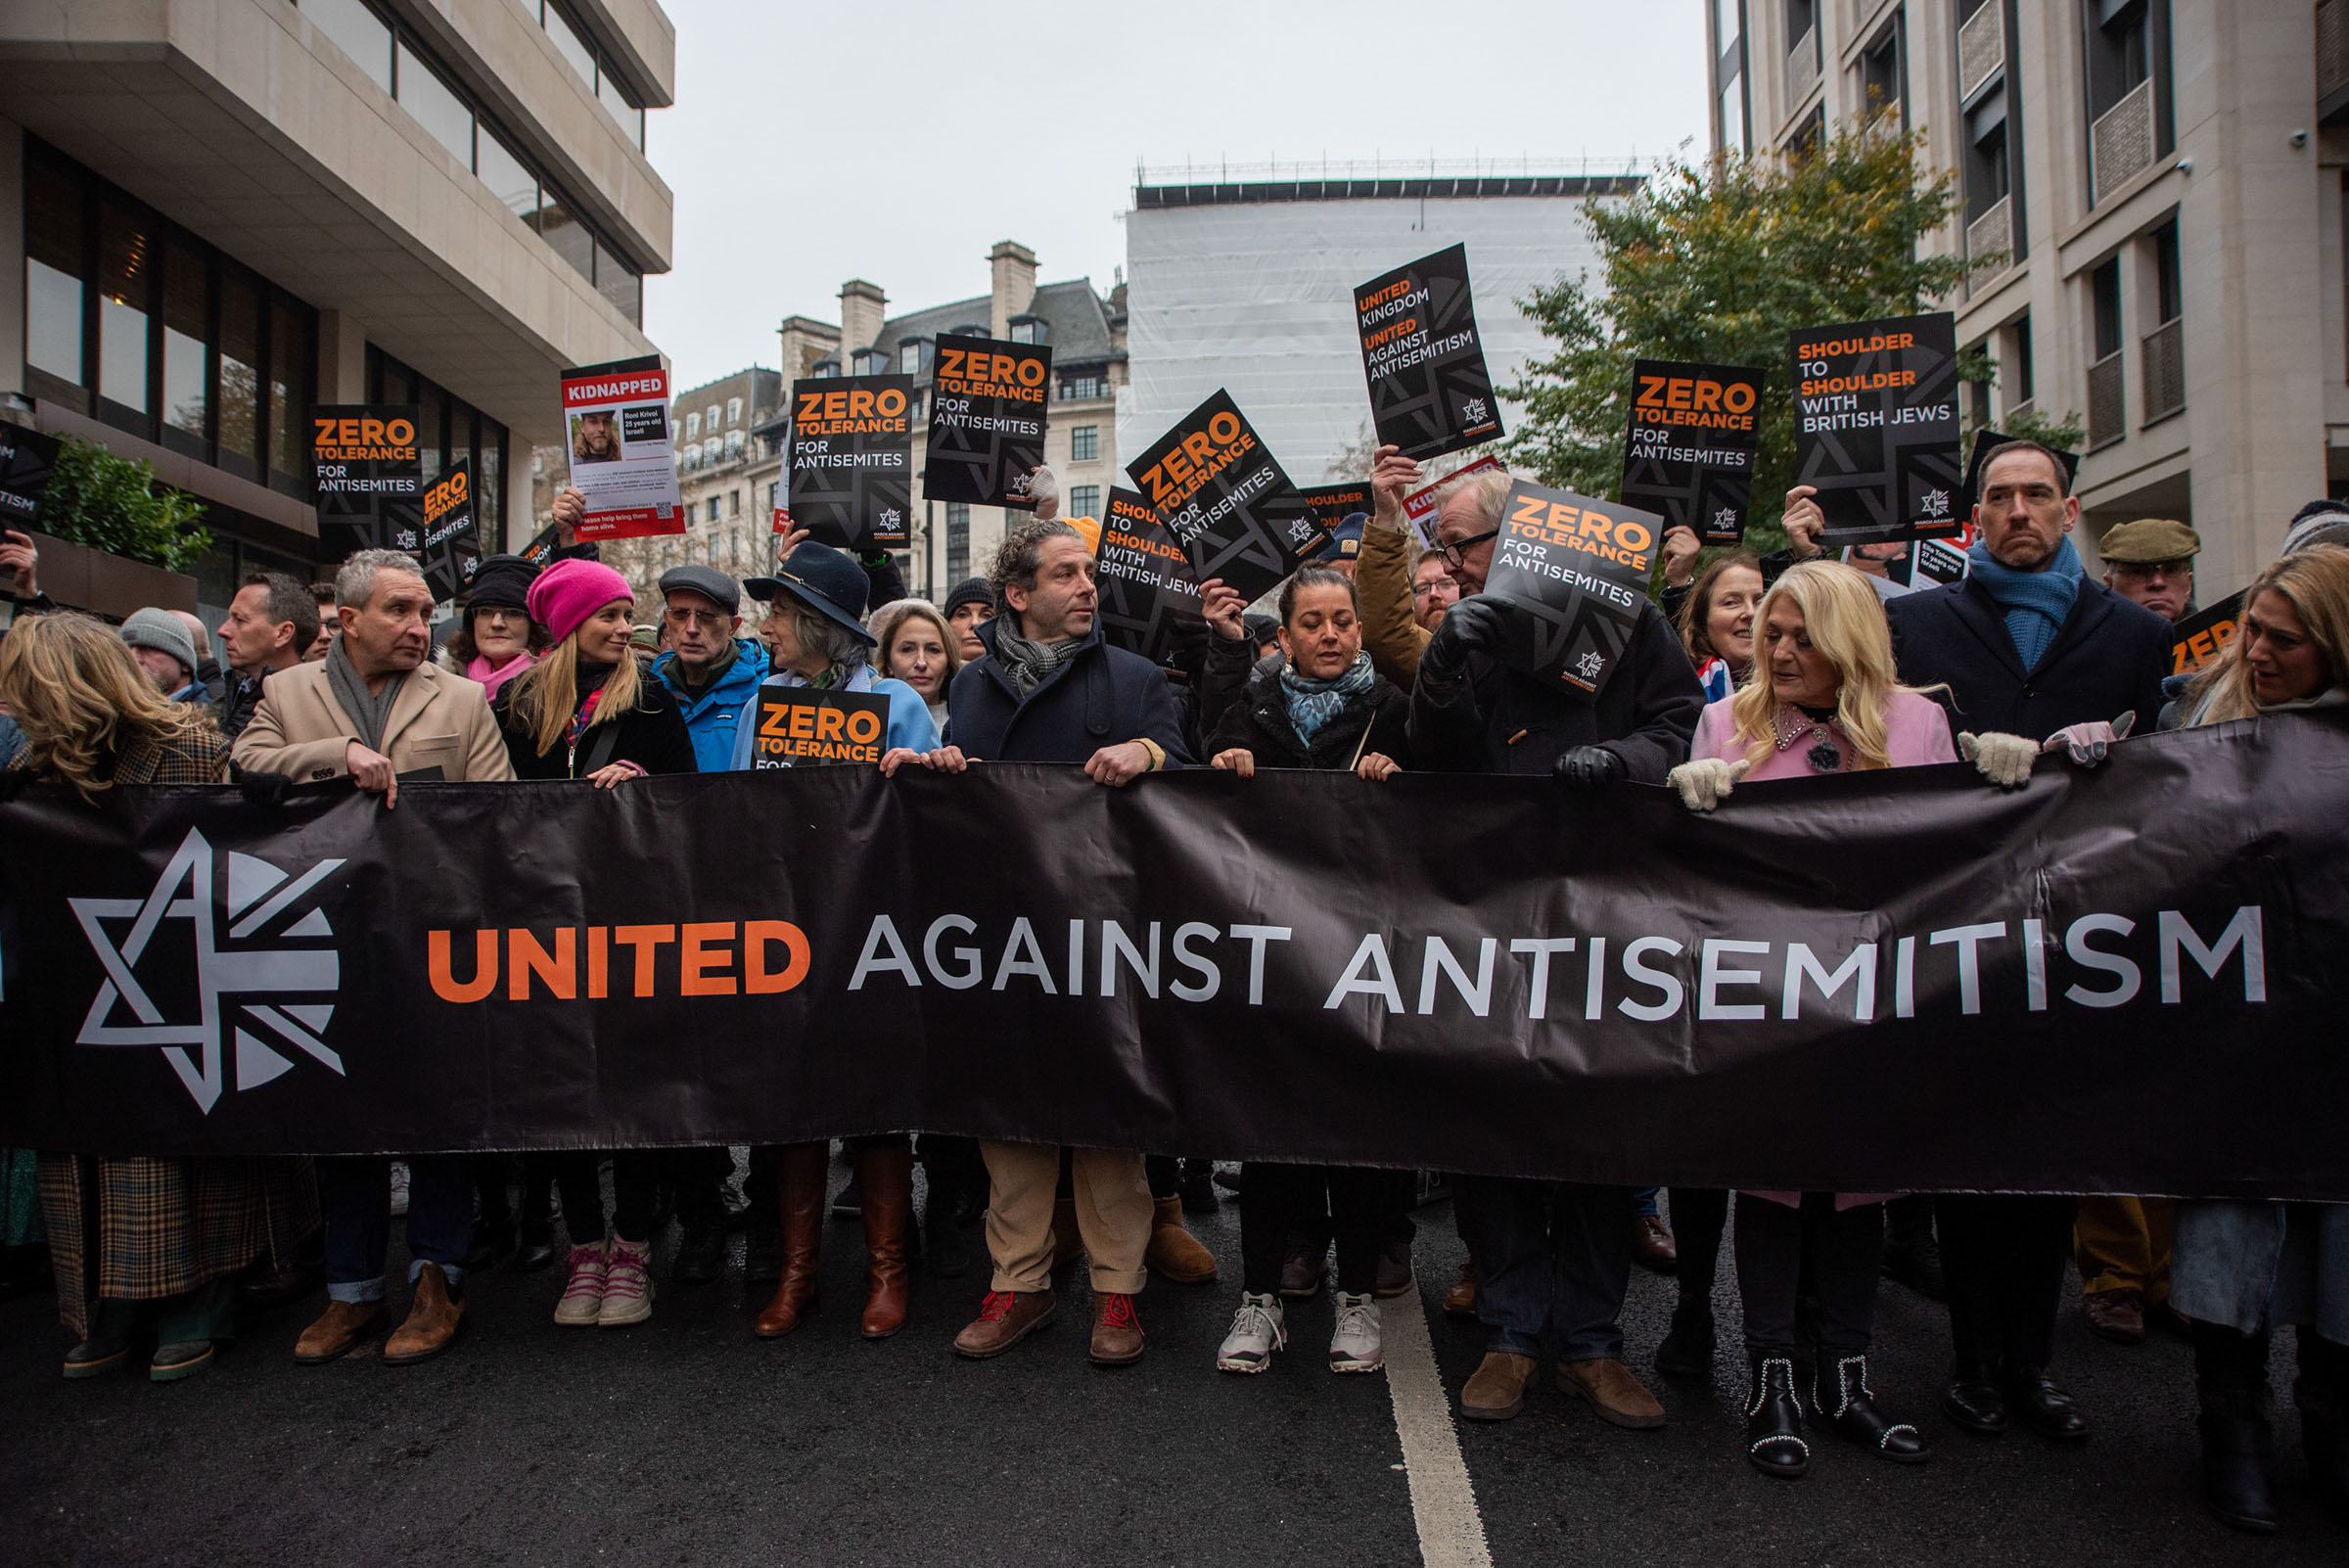 Protesters march through central London to Parliament Square at a demonstration against antisemitism.